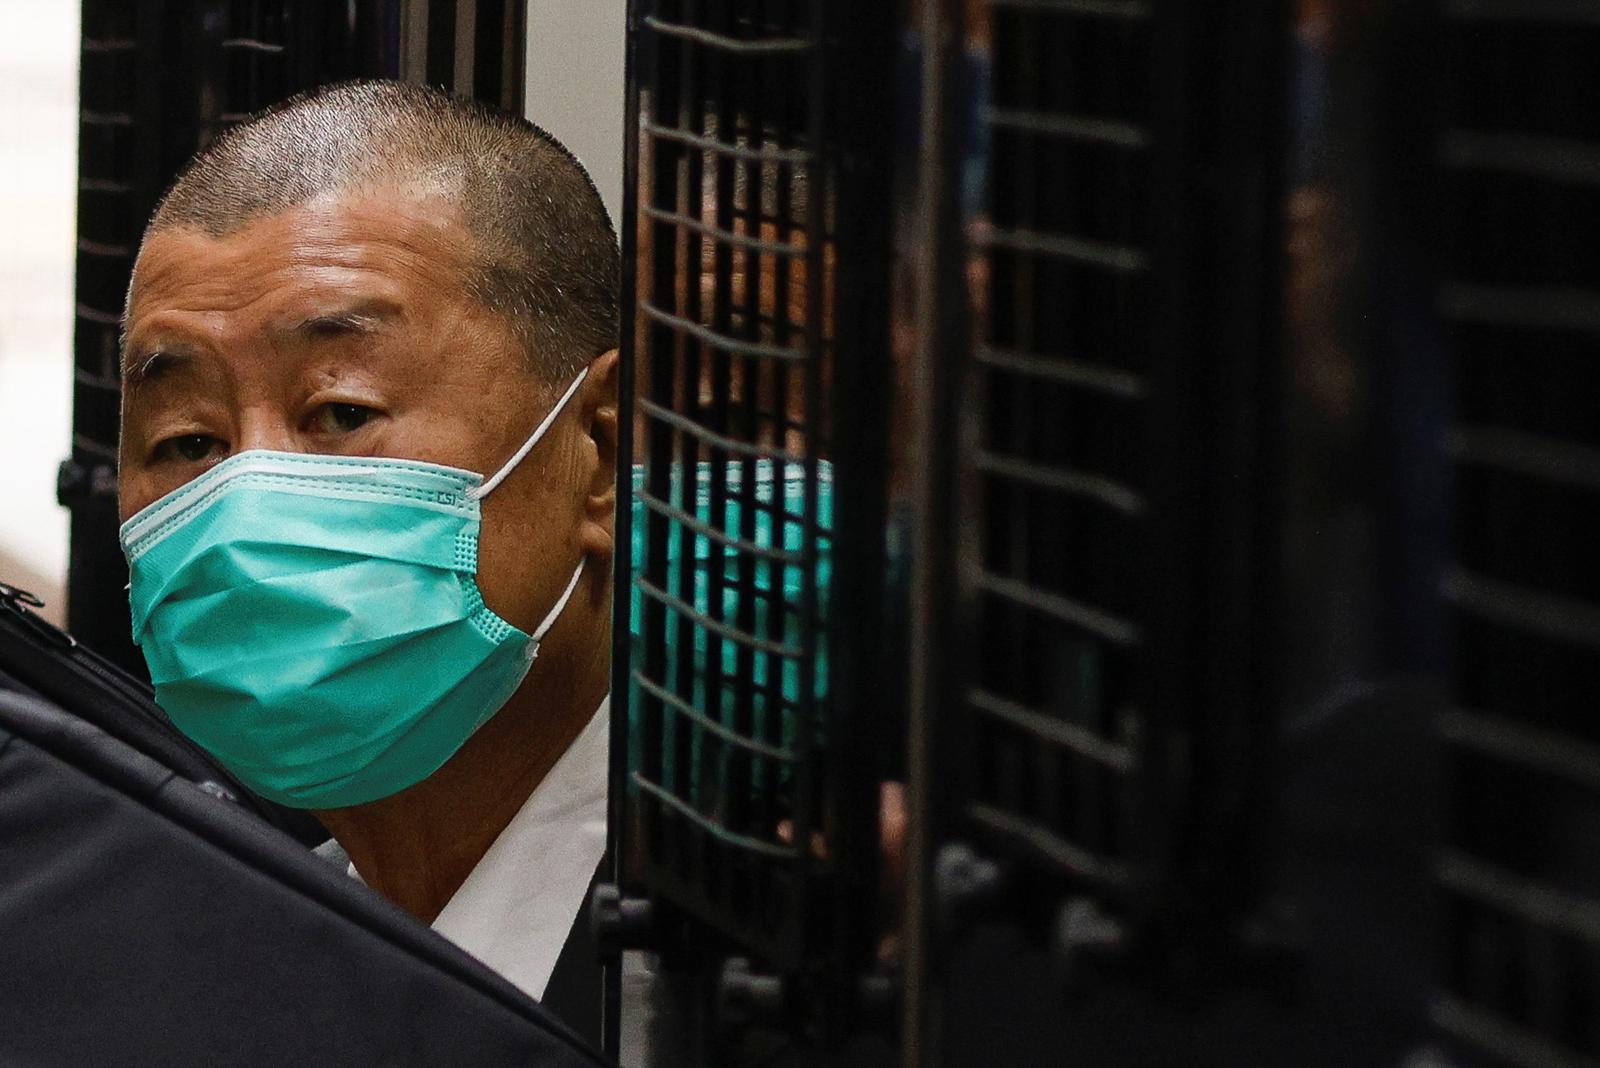 Jimmy Lai arrives at the Court of Final Appeal by prison van in Hong Kong on Feb. 9, 2021.